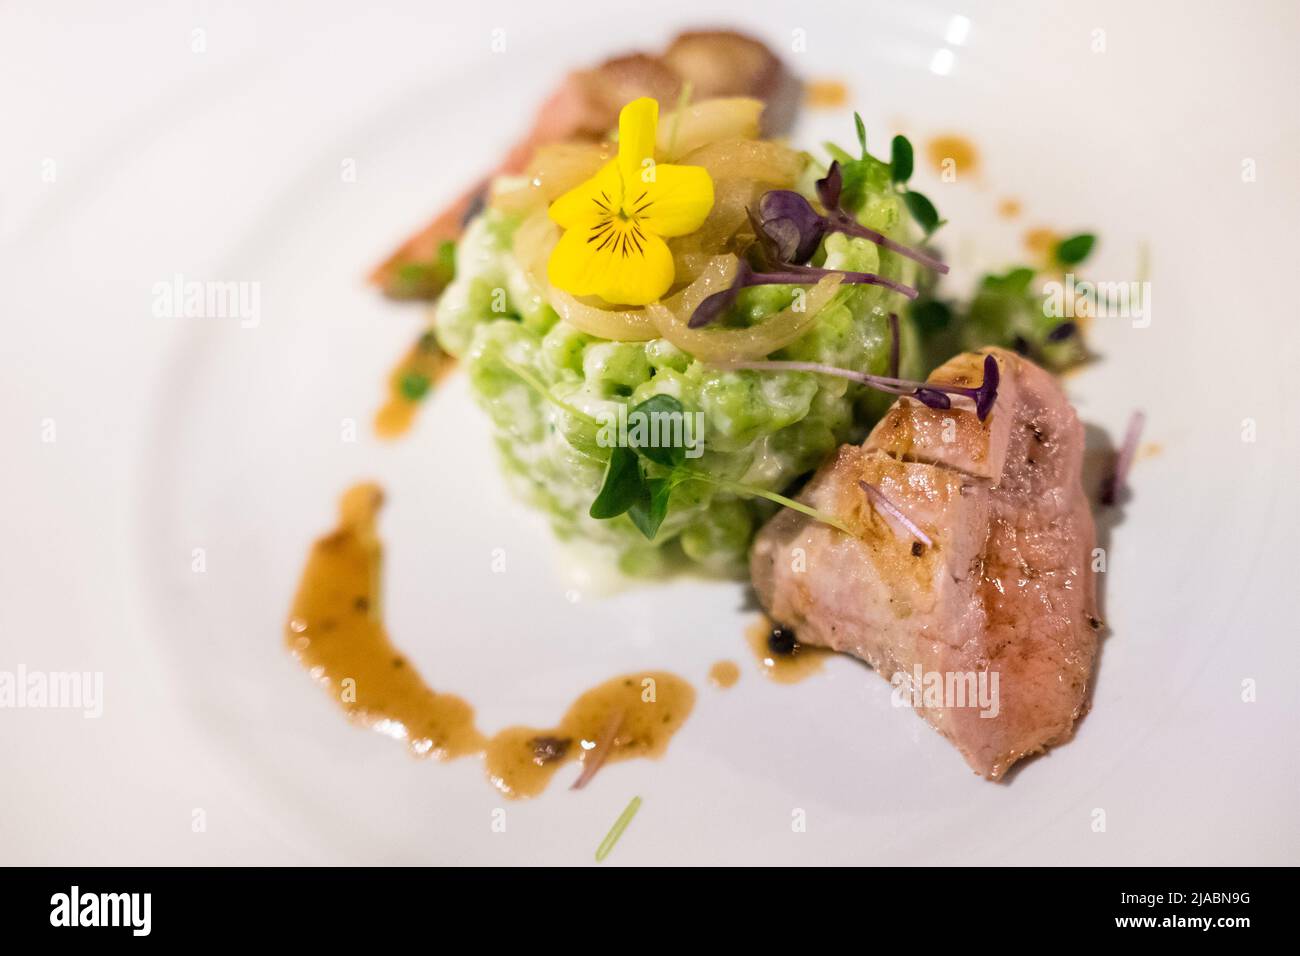 Grilled meat piece on the white plate served with green peas with cream sauce and microgreens. Healthy meals preparation and cooking concept Stock Photo